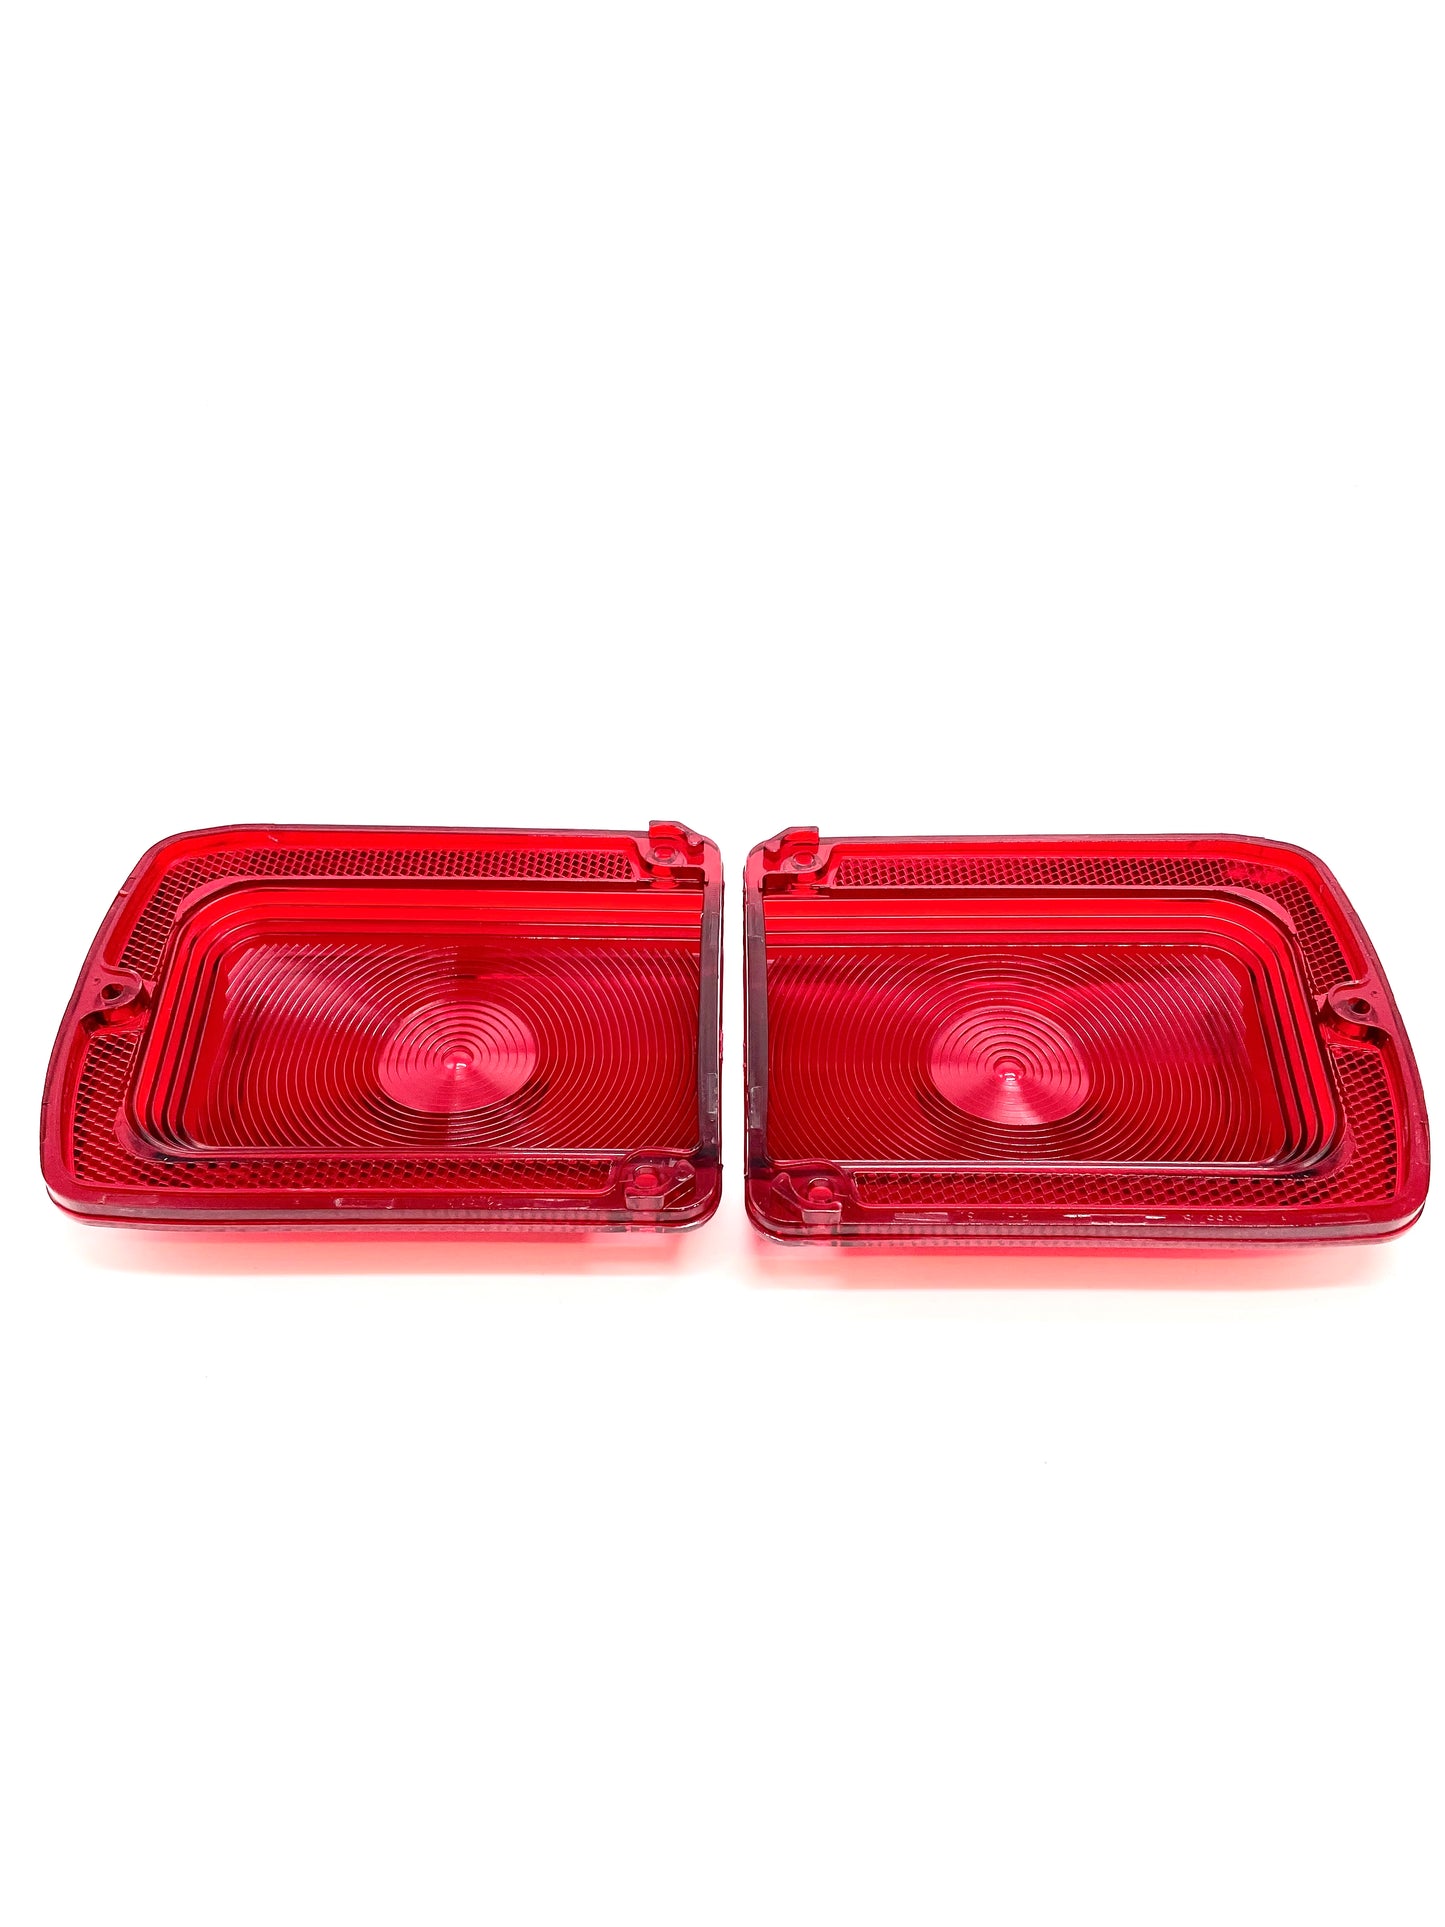 1965 Chevelle Taillight Lens, Sold in pairs